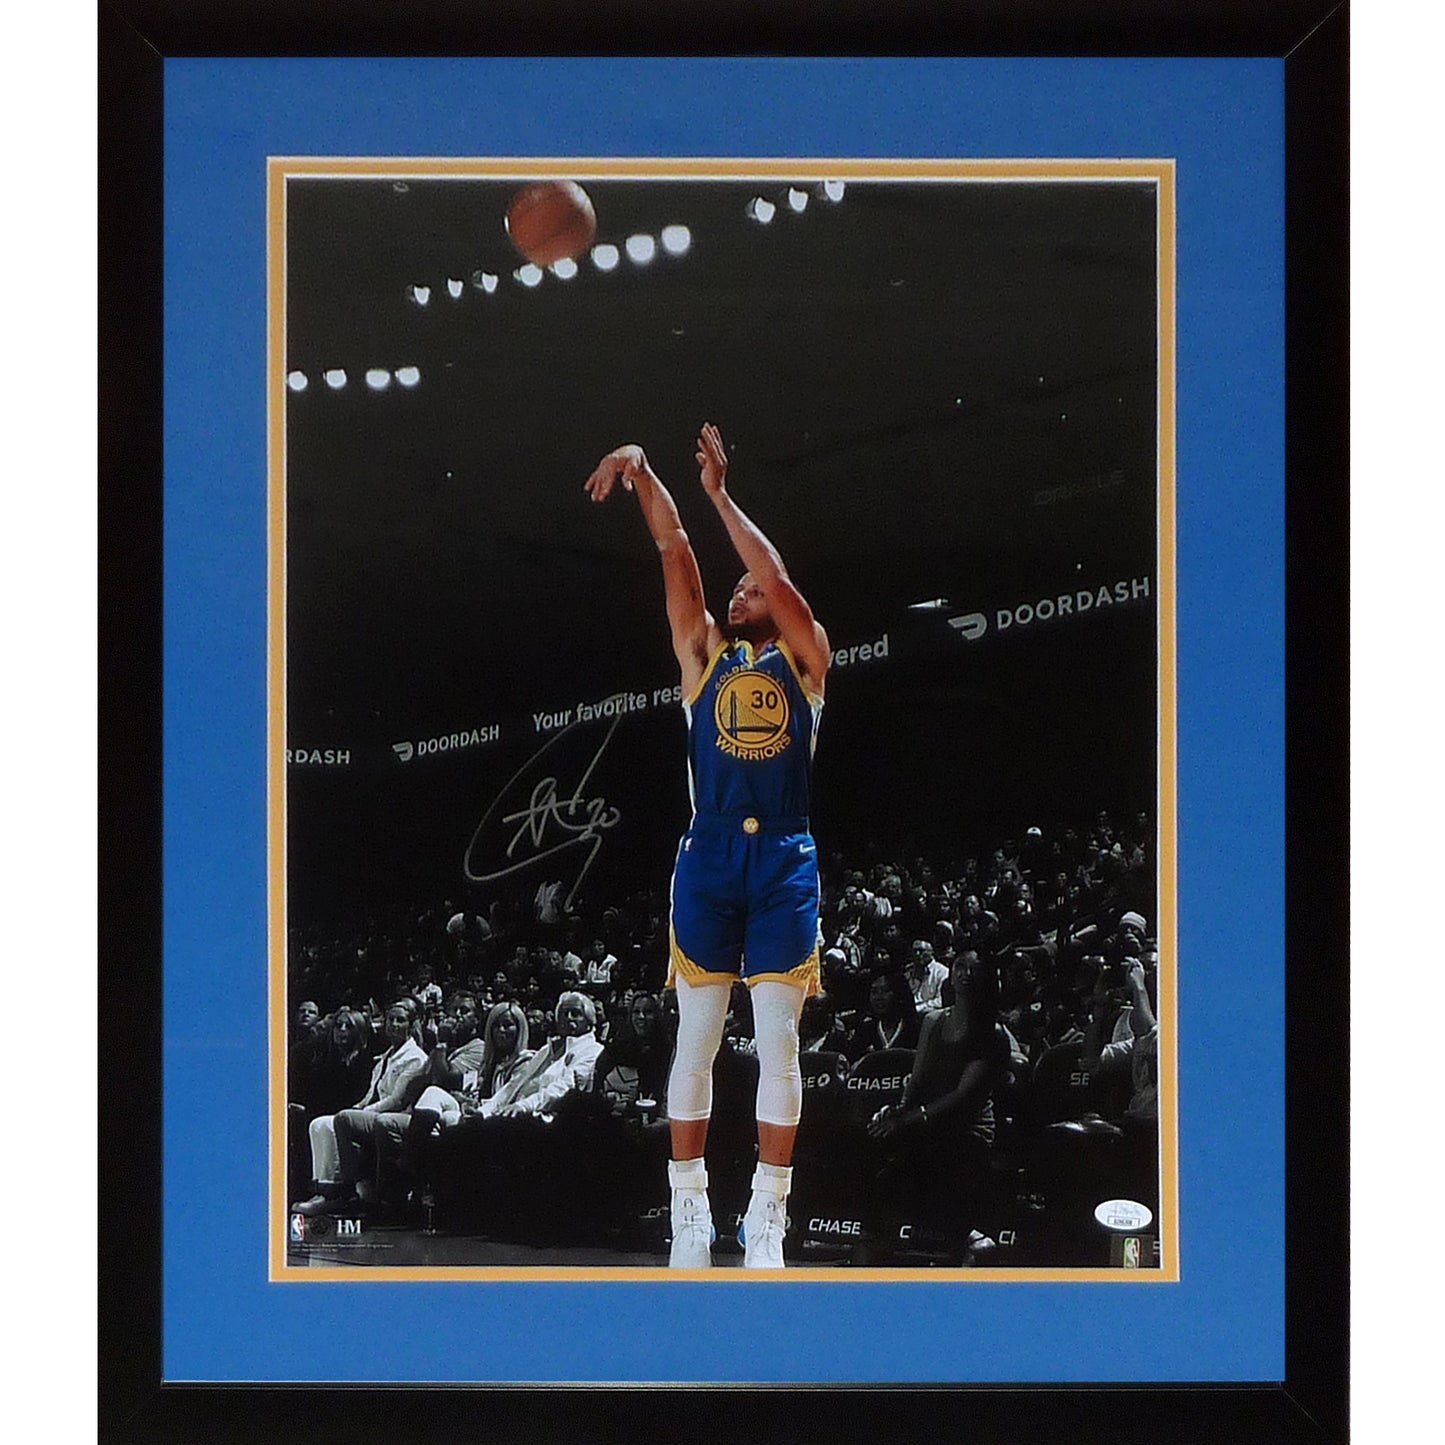 Stephen Curry Autographed Golden State Warriors (Action) Deluxe Framed 16x20 Photo - JSA